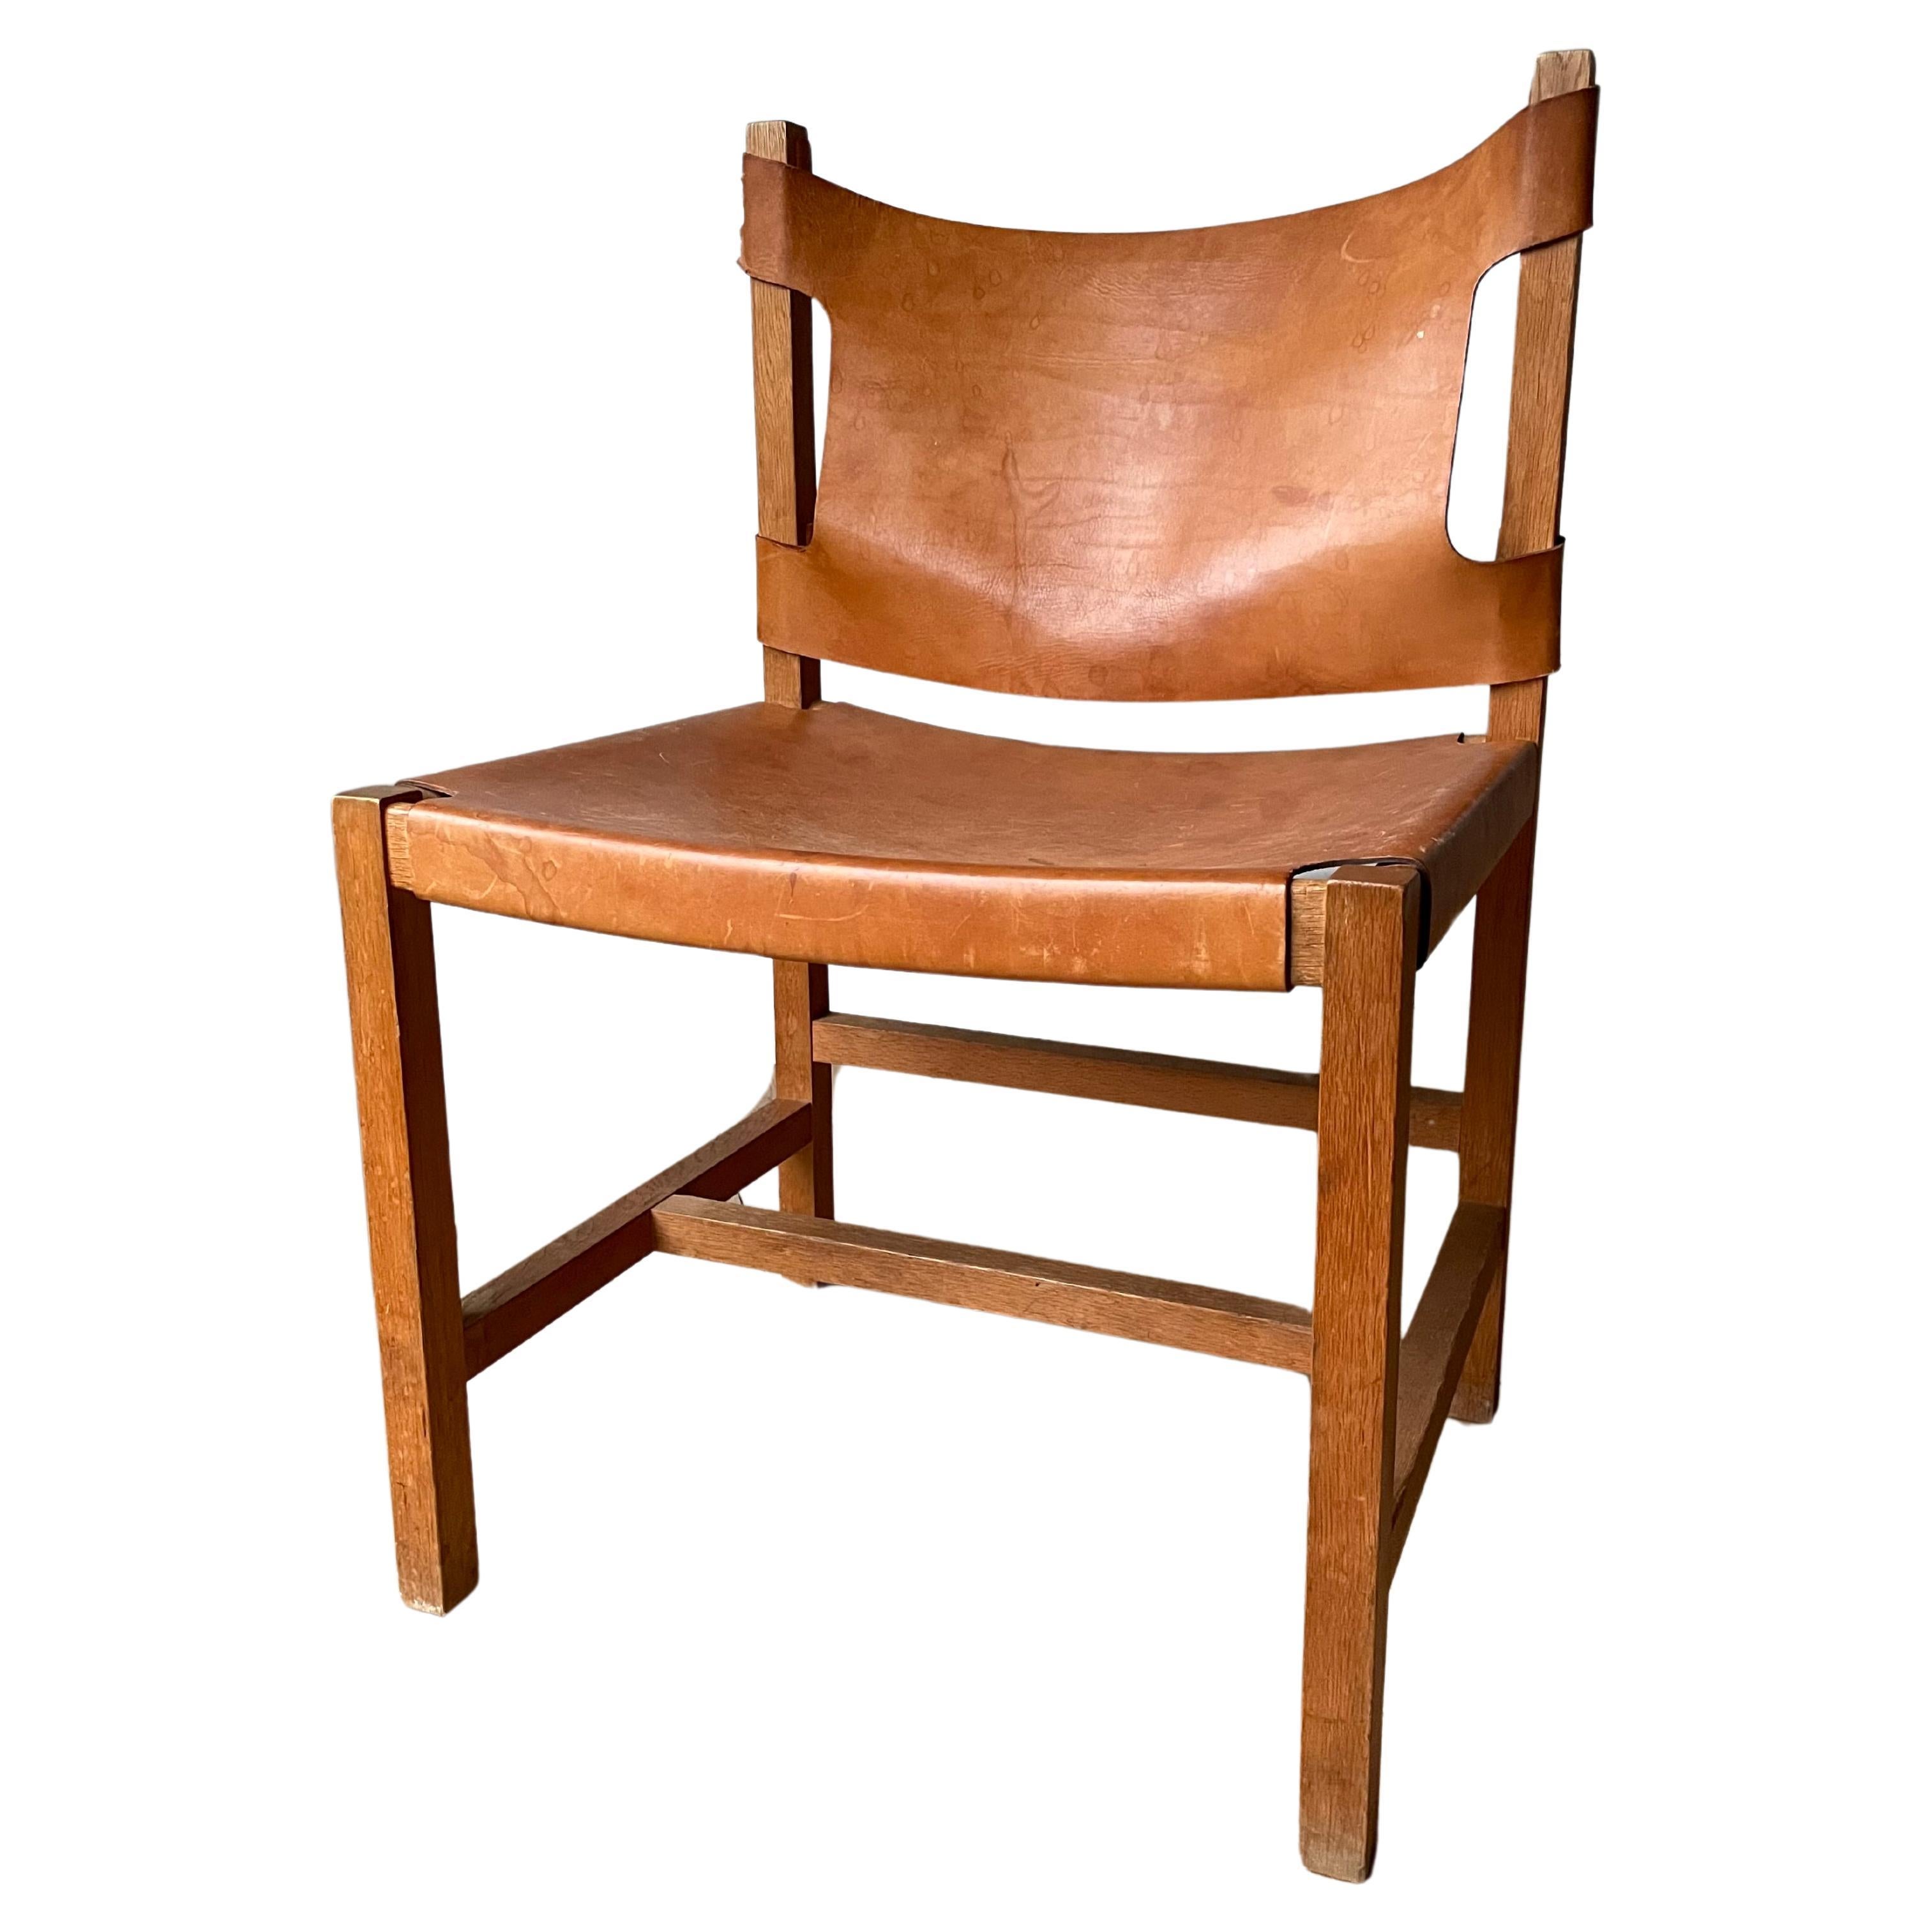 Danish Modern Wooden Leather Seat Chair, 1960s